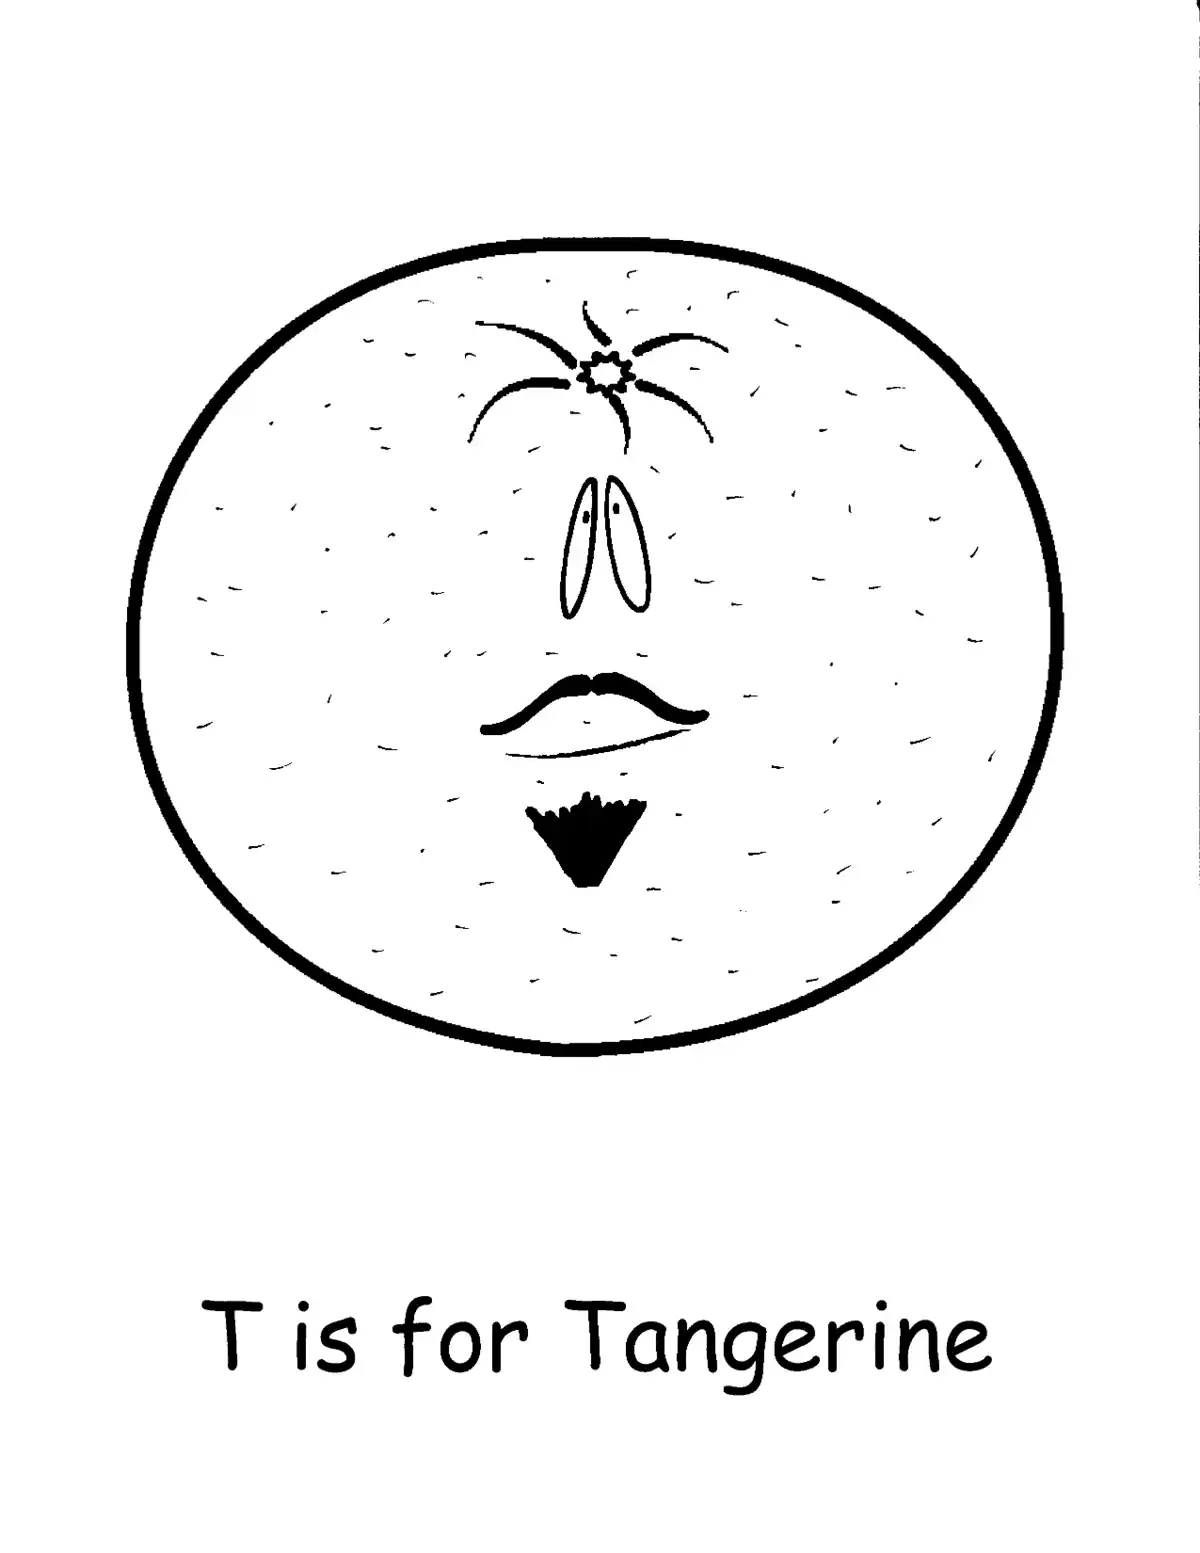 Free Coloring Pages PDF, Tangerine Fruit Kids Coloring Pages Pdf